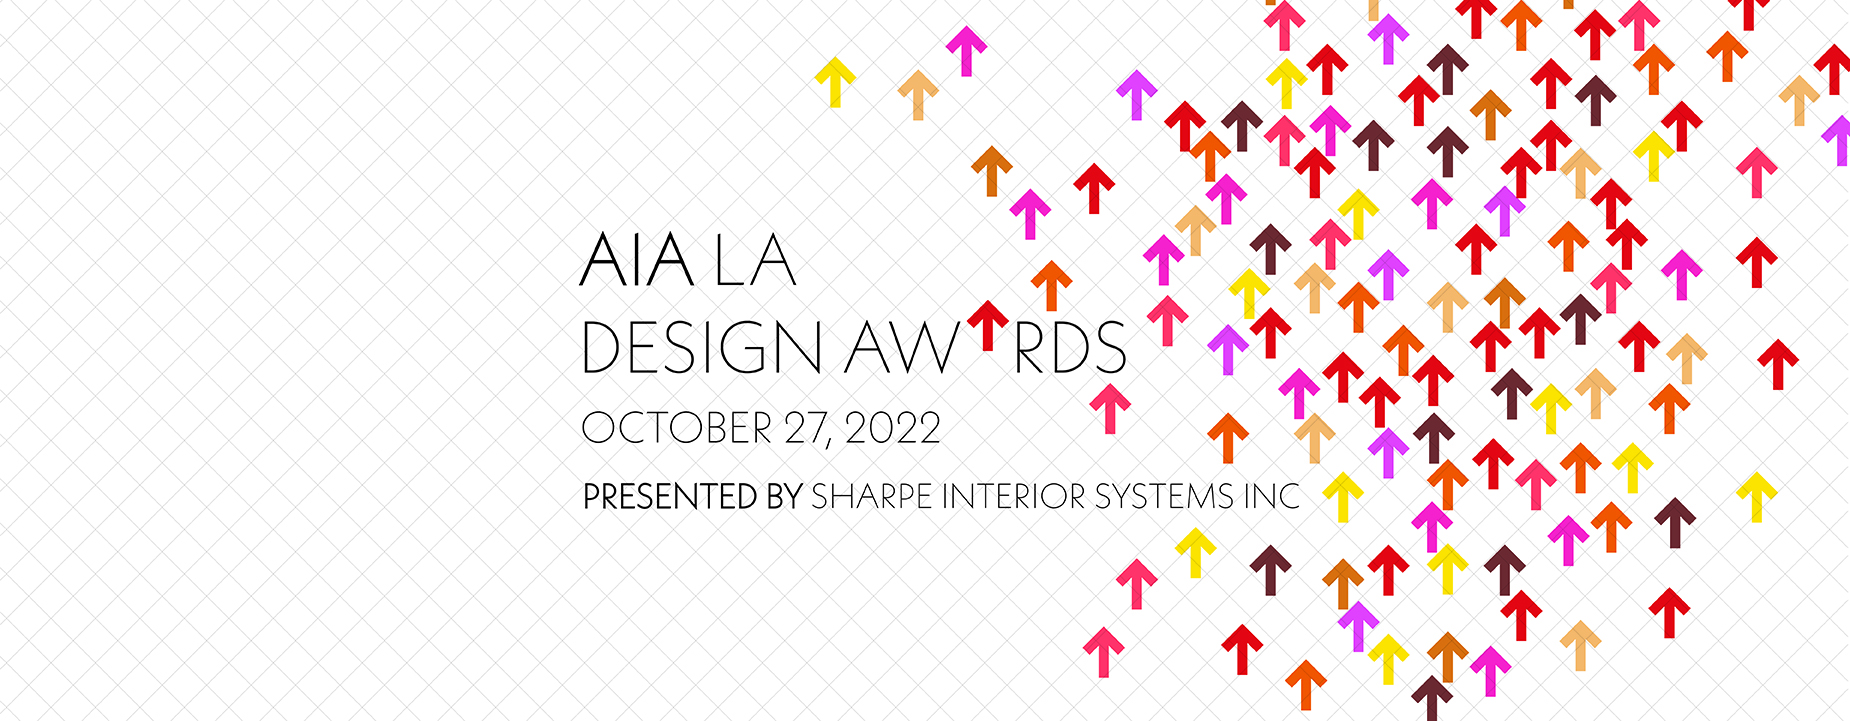 AIA Los Angeles | Taking the power of design and architecture to ...